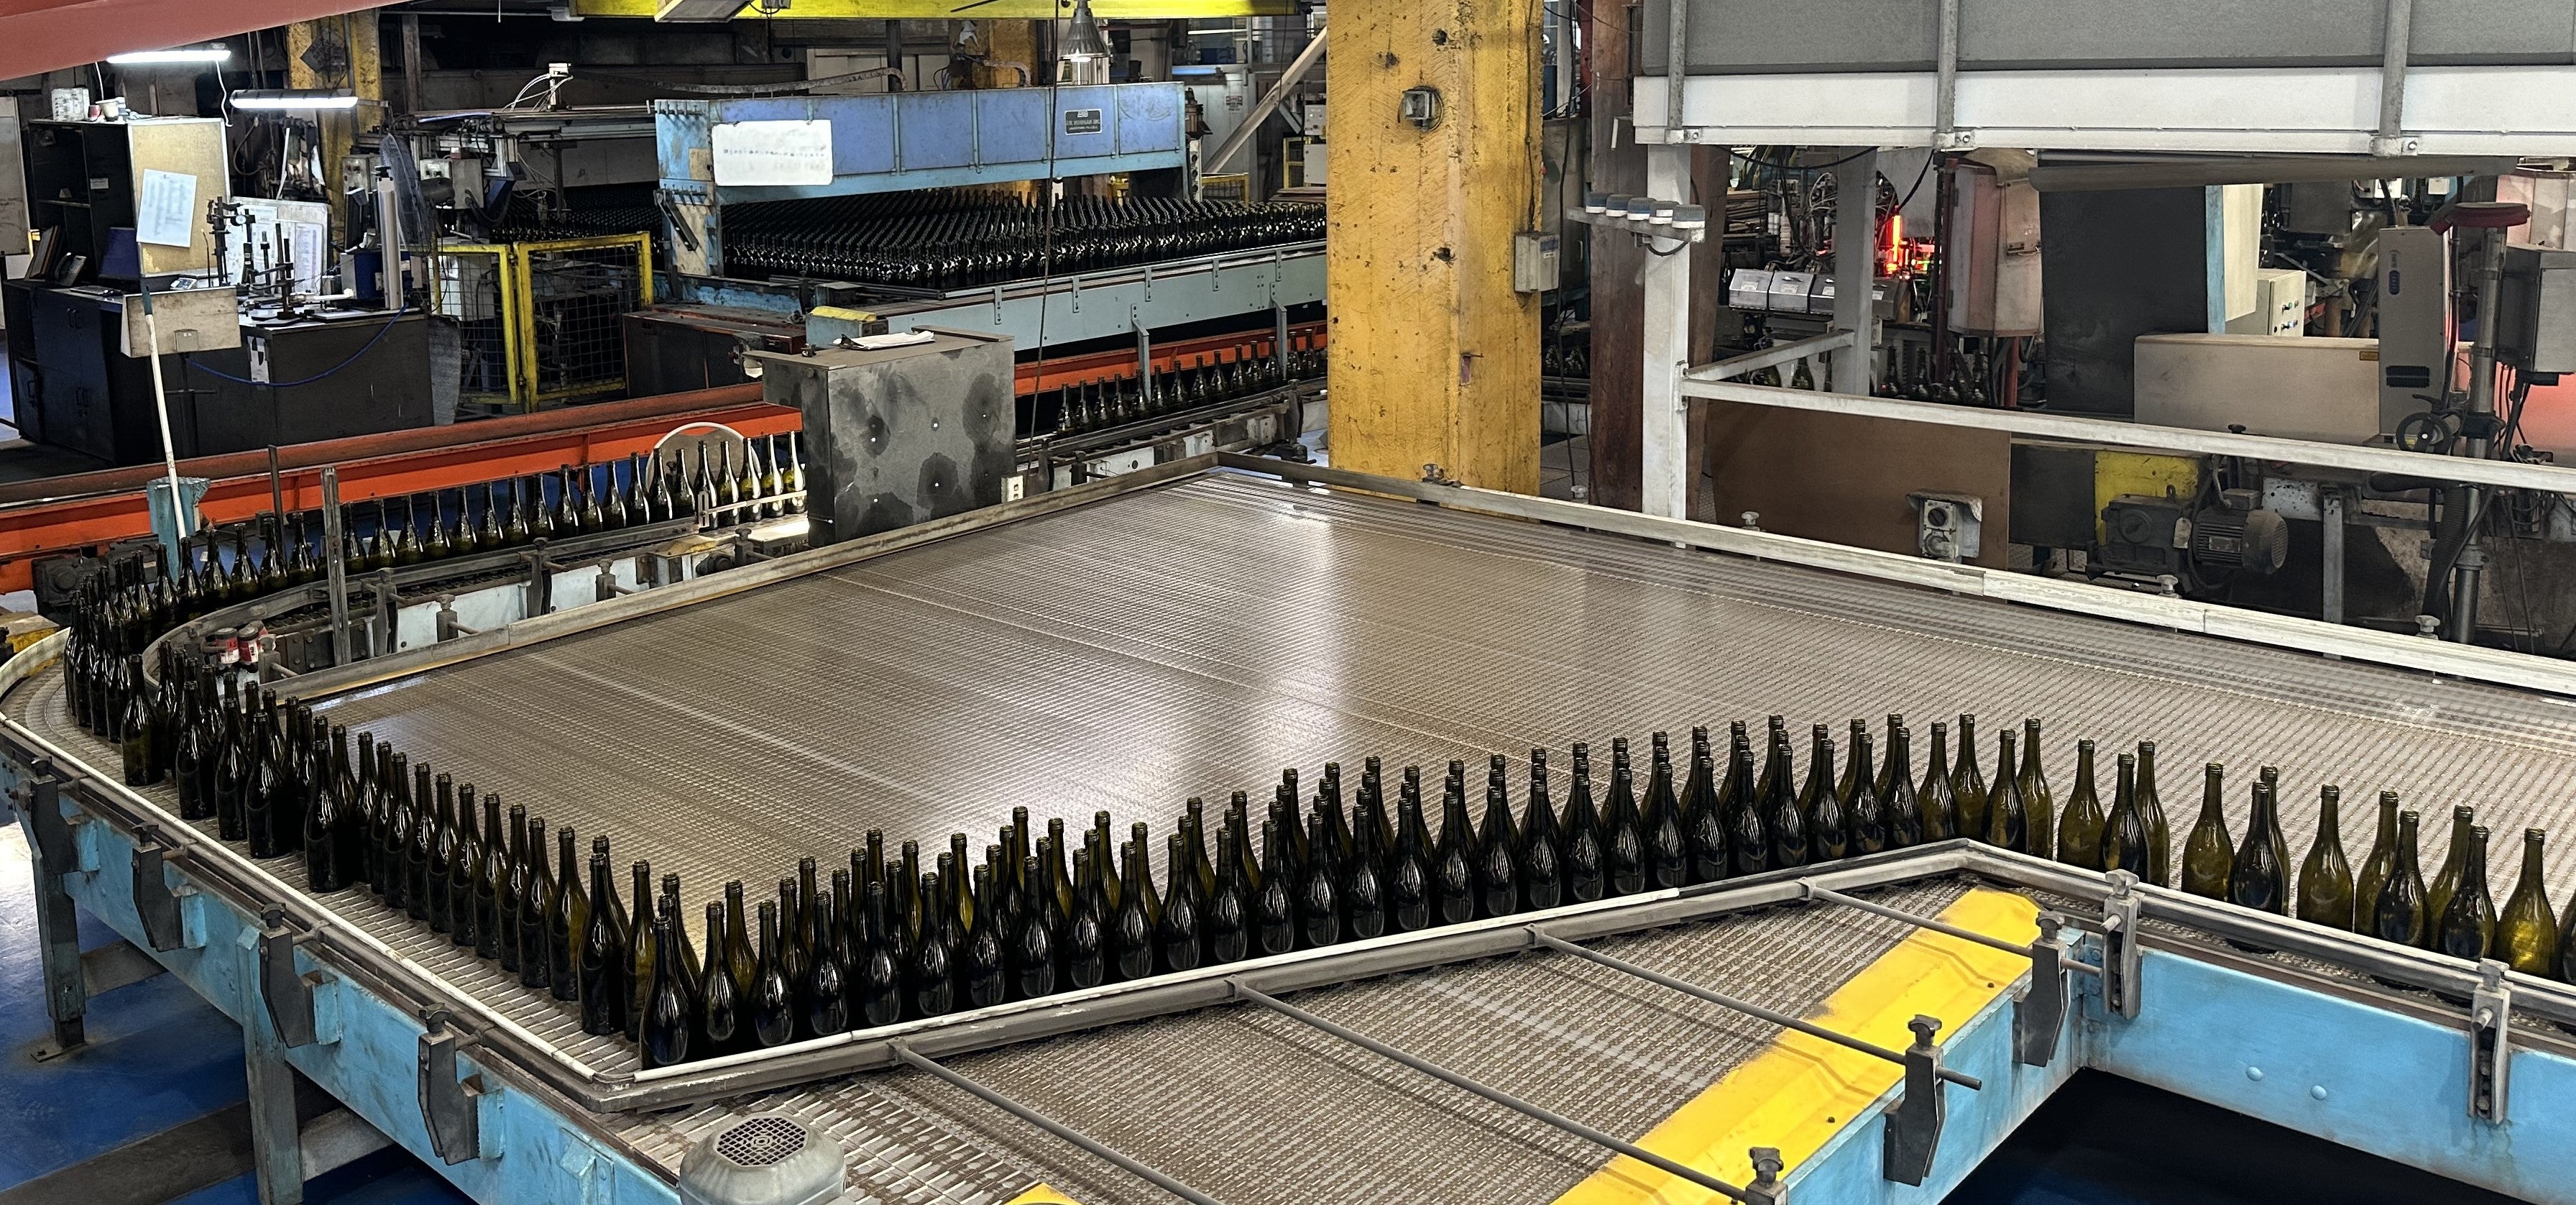 Brown glass bottles on a conveyor belt in a glass manufacturing facility